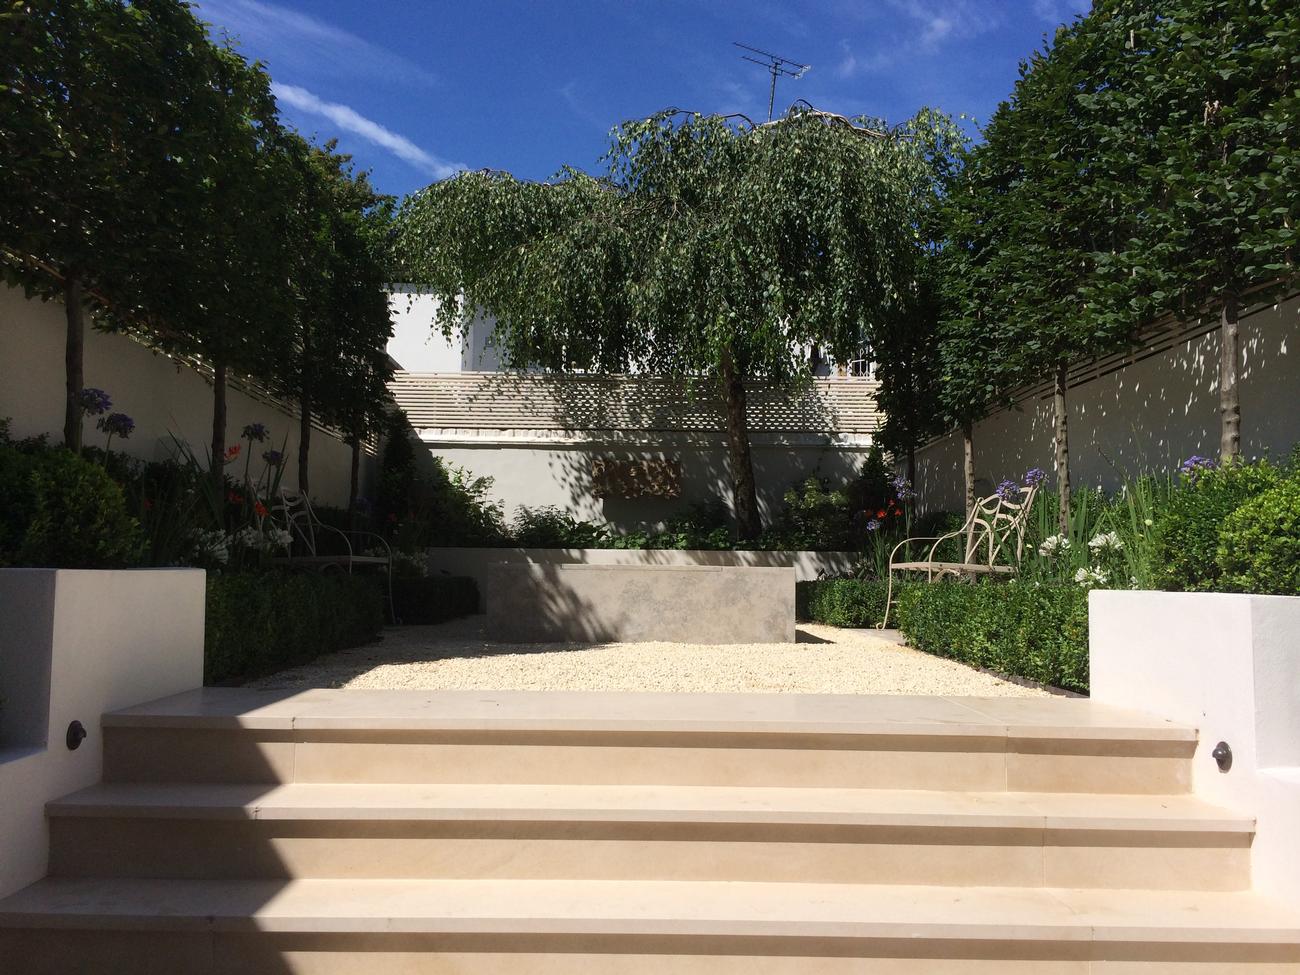 Courtyards and Roof Gardens | Landscaper in Central London and Knightsbridge gallery image 2